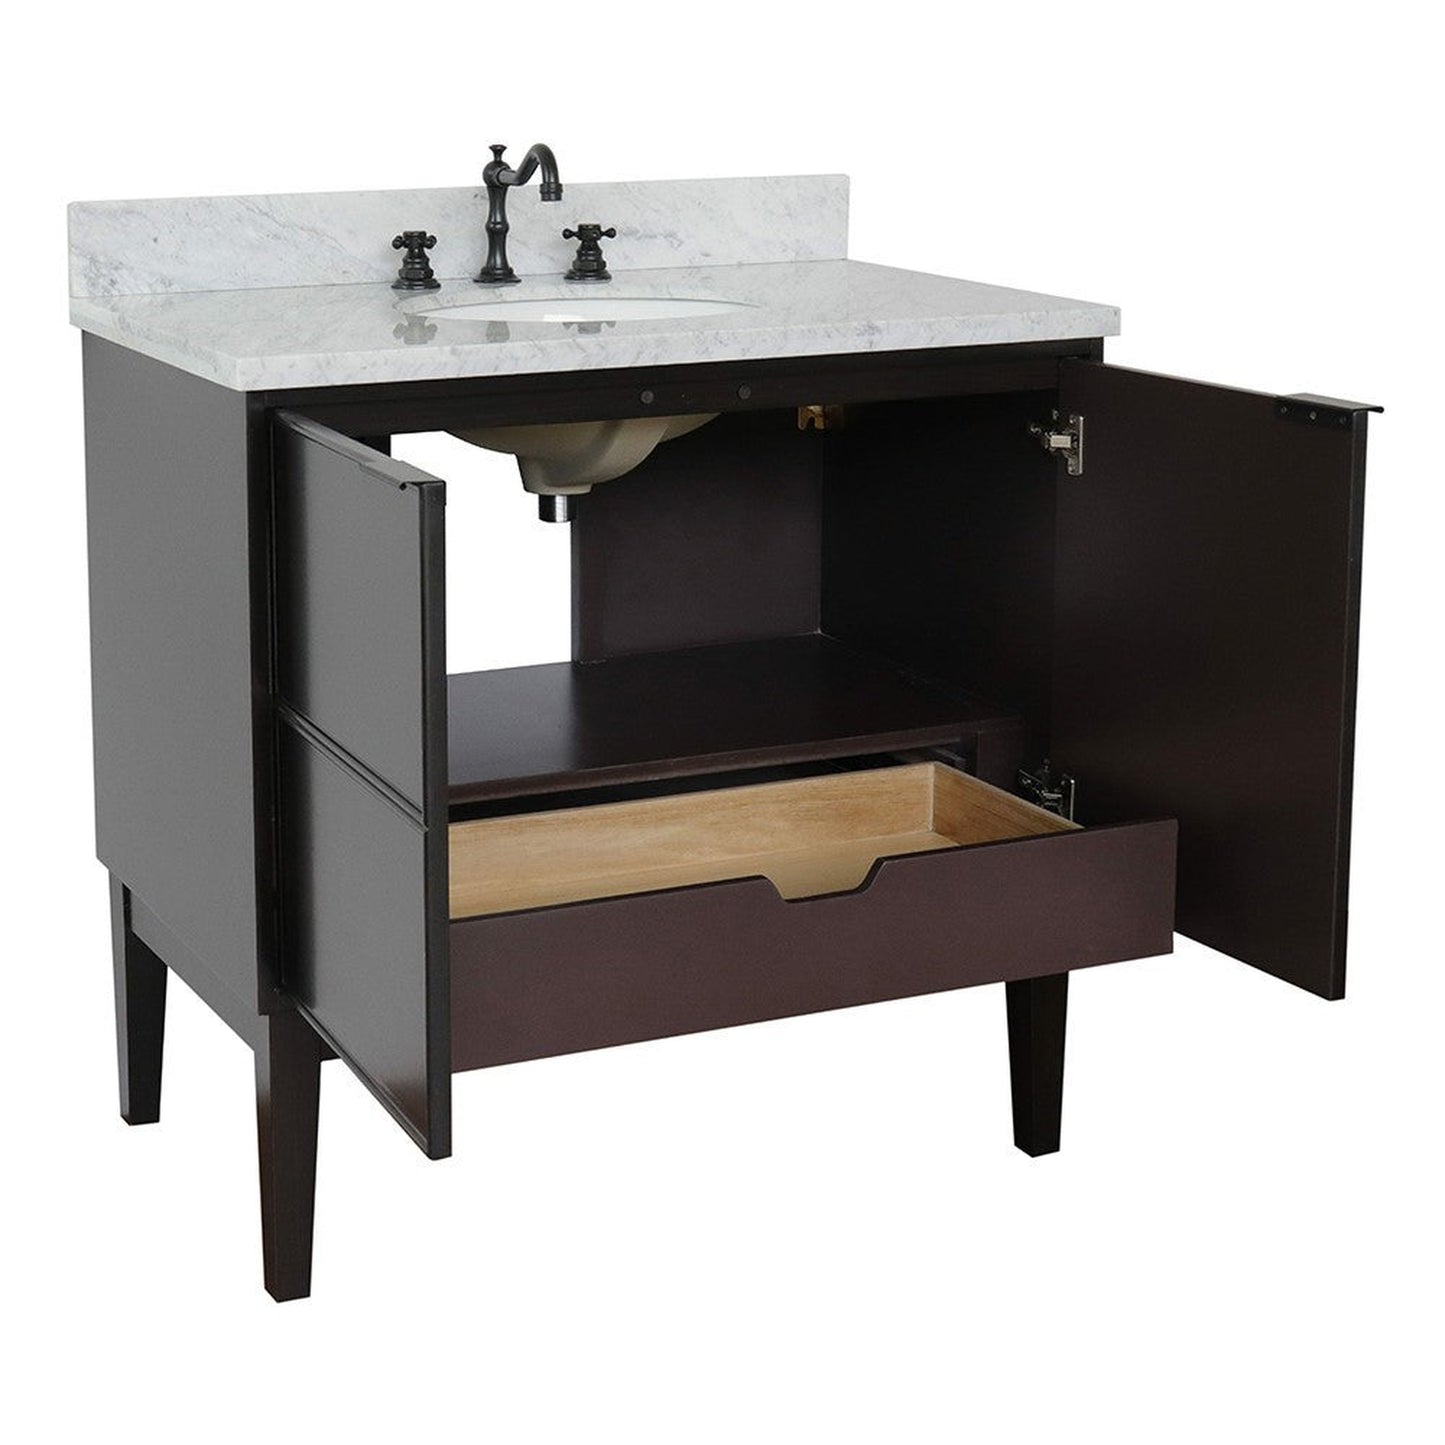 Bellaterra Home Cafe 37" 2-Door 1-Drawer Cappuccino Freestanding Vanity Set With Ceramic Undermount Oval Sink and White Carrara Marble Top